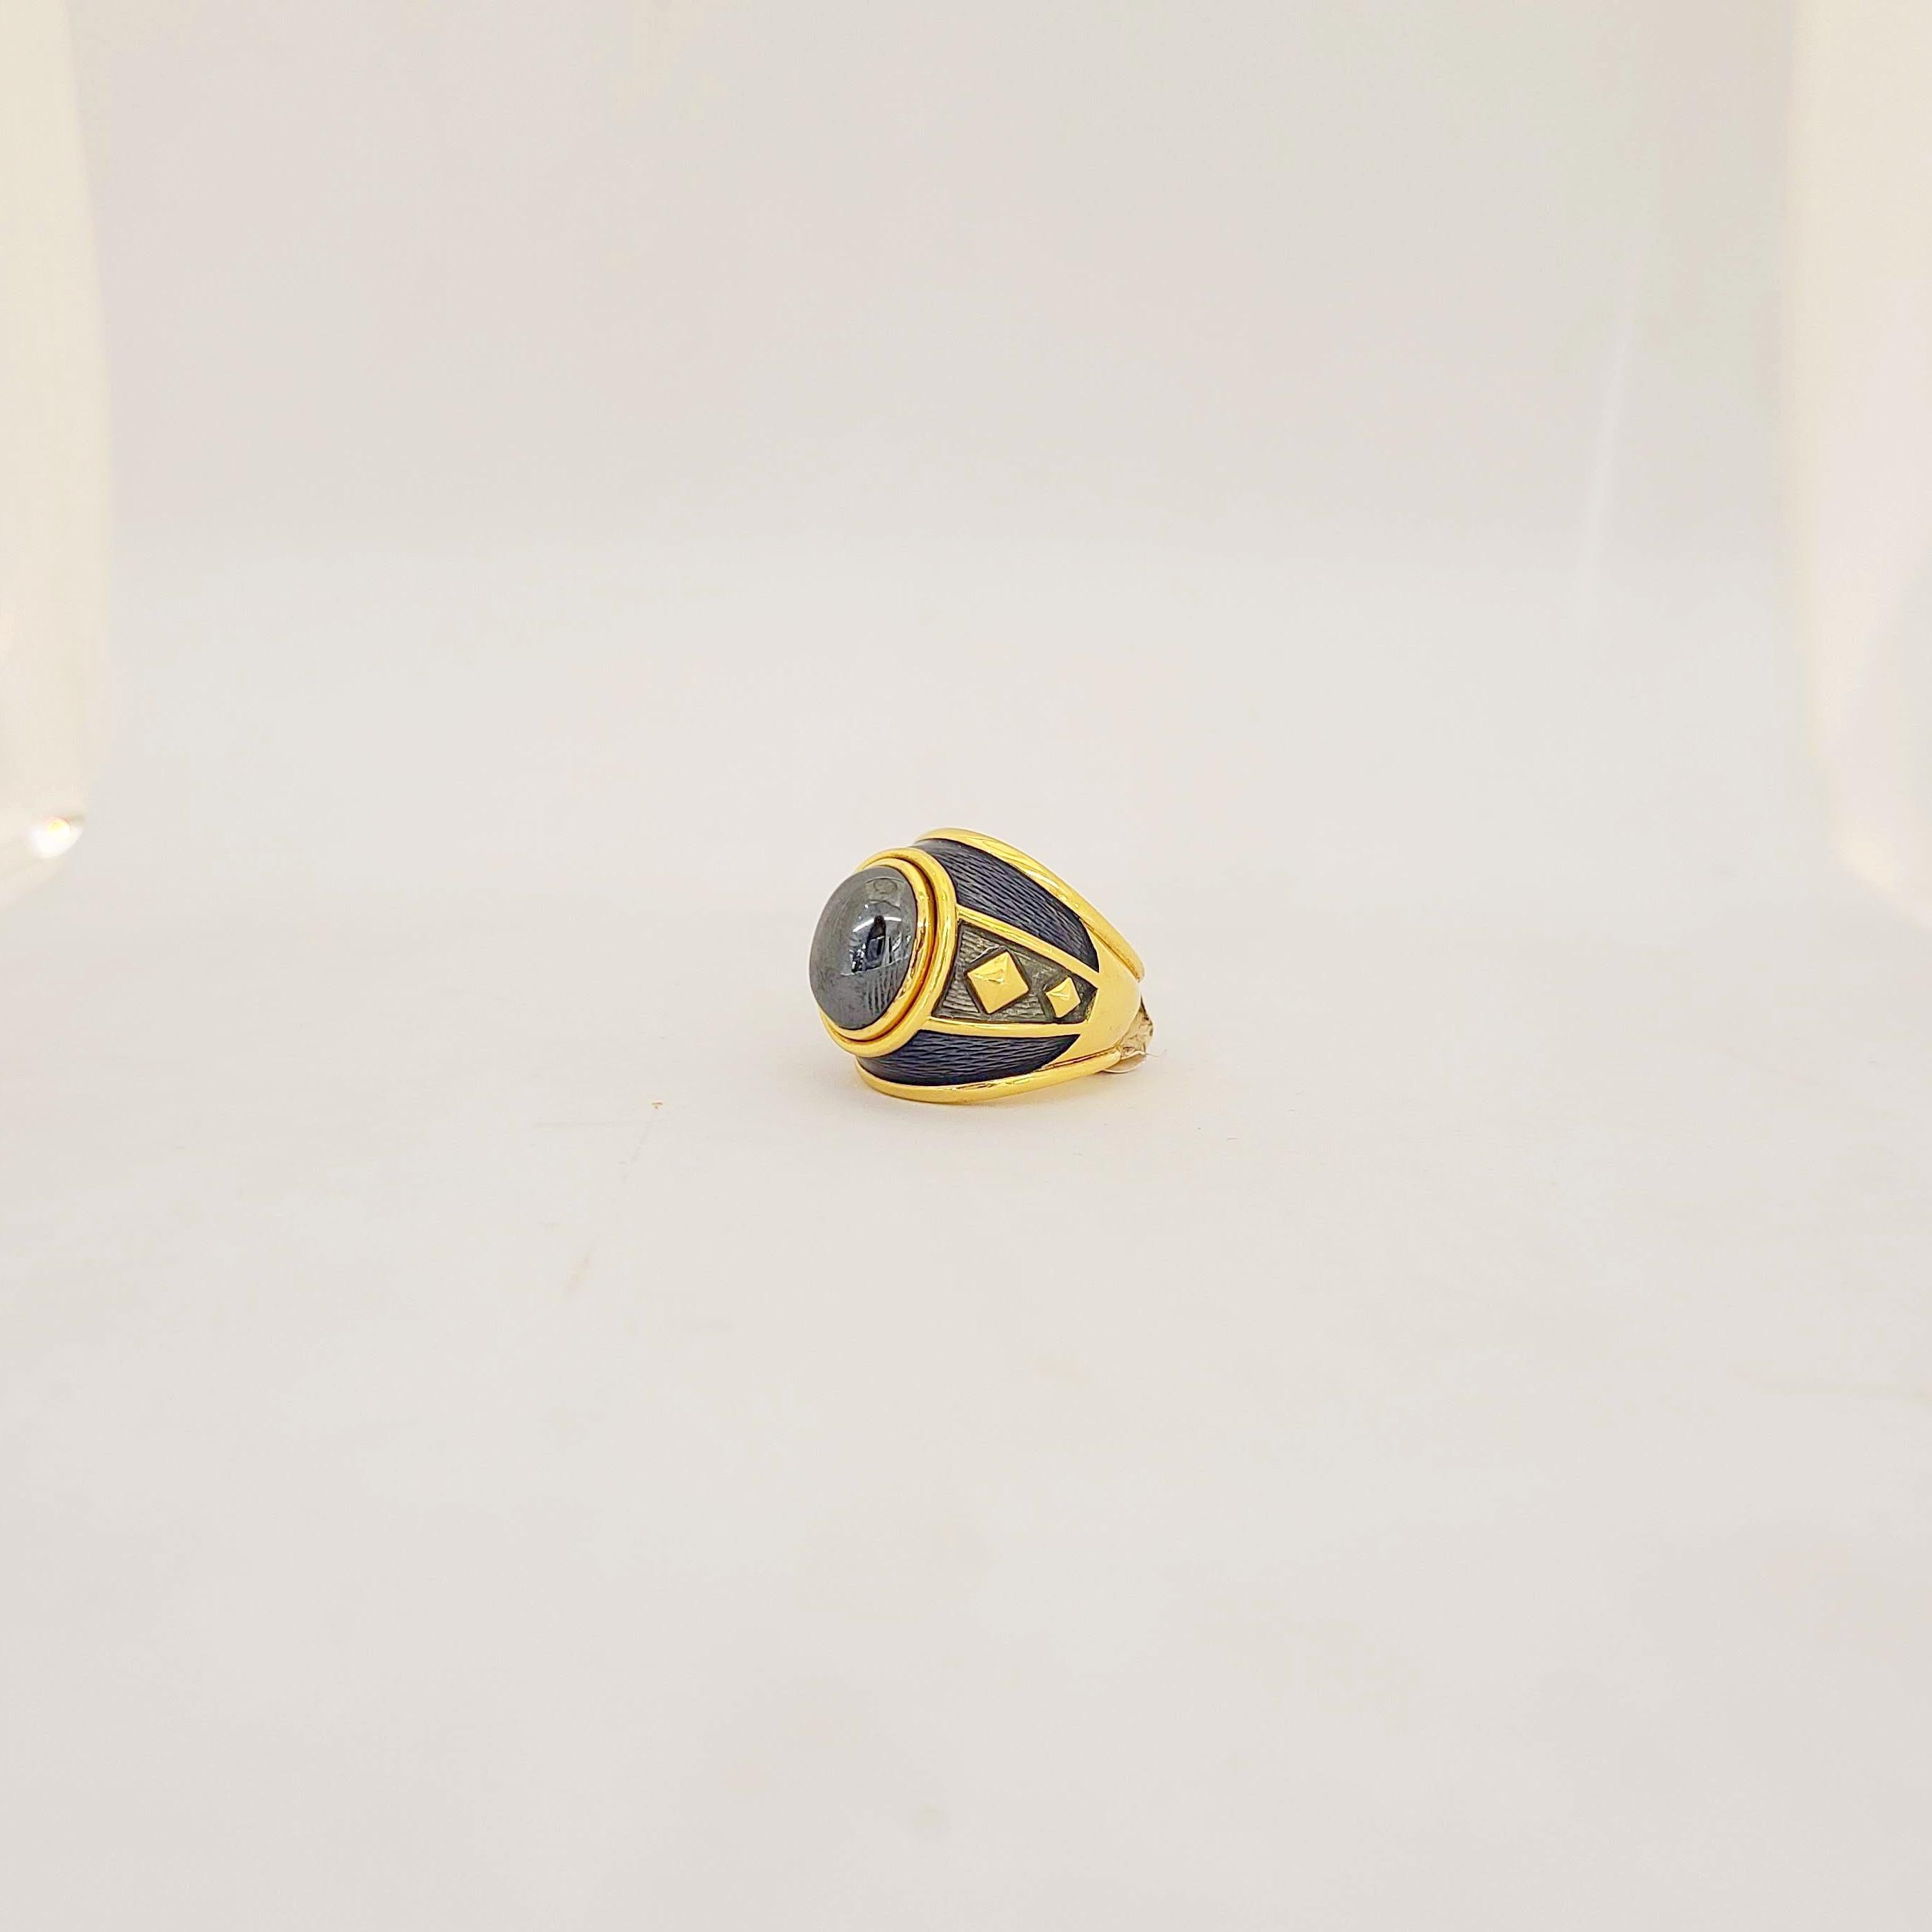 Started in 1967 by Leo and Ginnie de Vroomen the company is known for bold and innovative designs, along with exquisite enamel work.  Distinctive from the start, the renowned company is simply known as de Vroomen.
This solid 18 karat yellow gold,